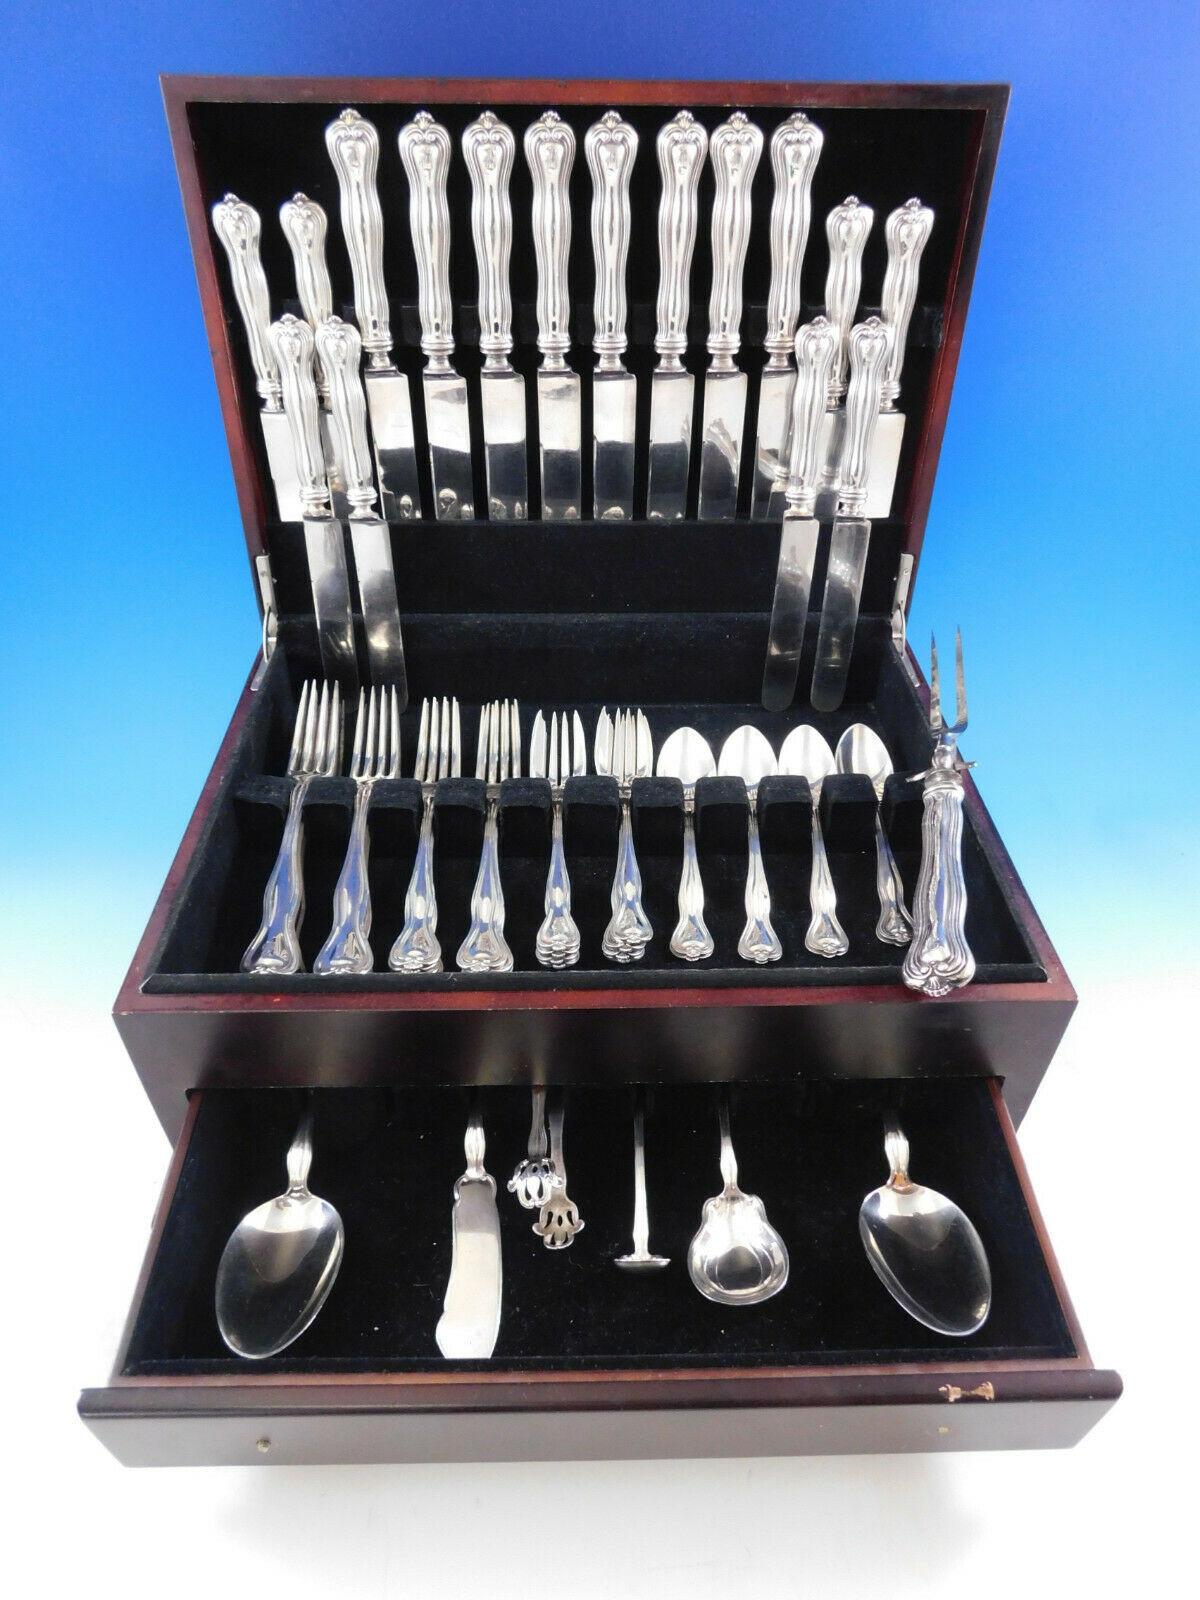 Mount Vernon by Watson Sterling Silver flatware set, 55 pieces. This set includes:

8 dinner size knives, 10 1/8